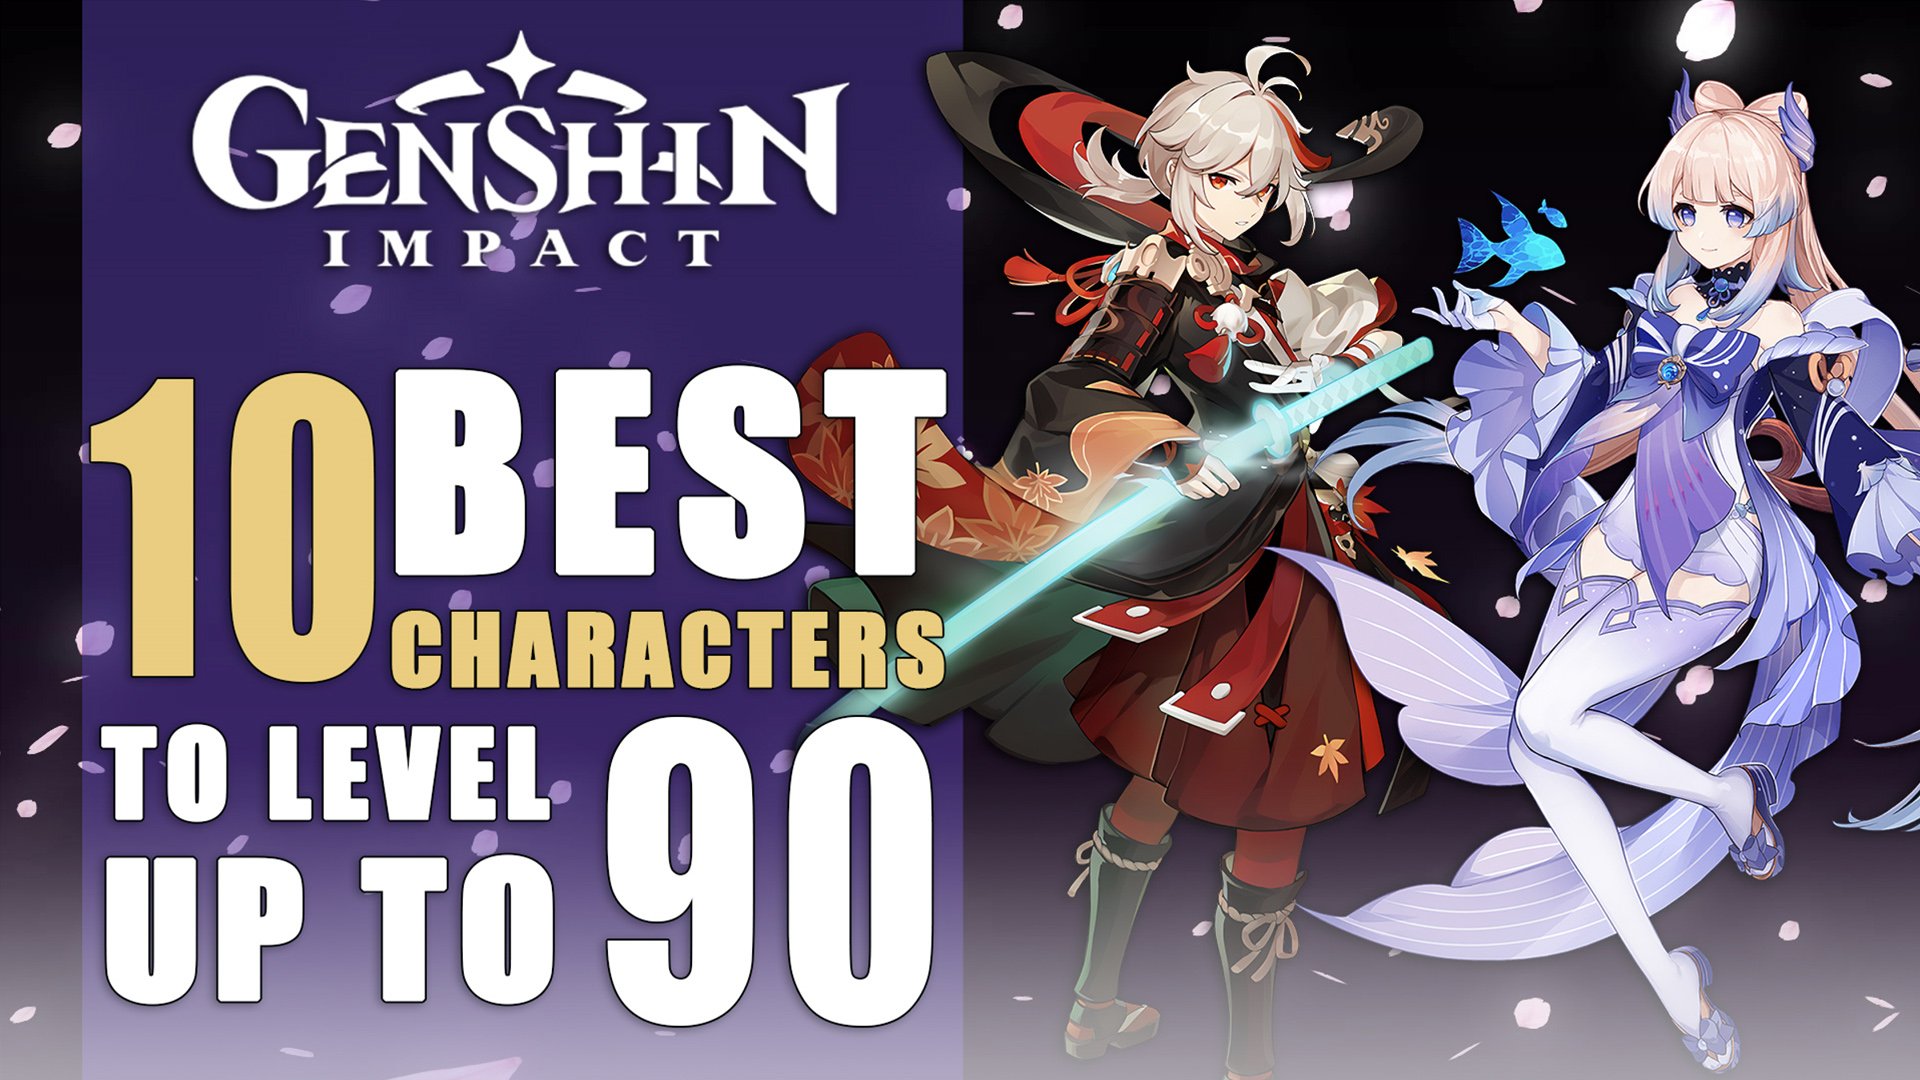 Genshin Impact: 10 Best Characters to Level to 90 Guide - Fextralife